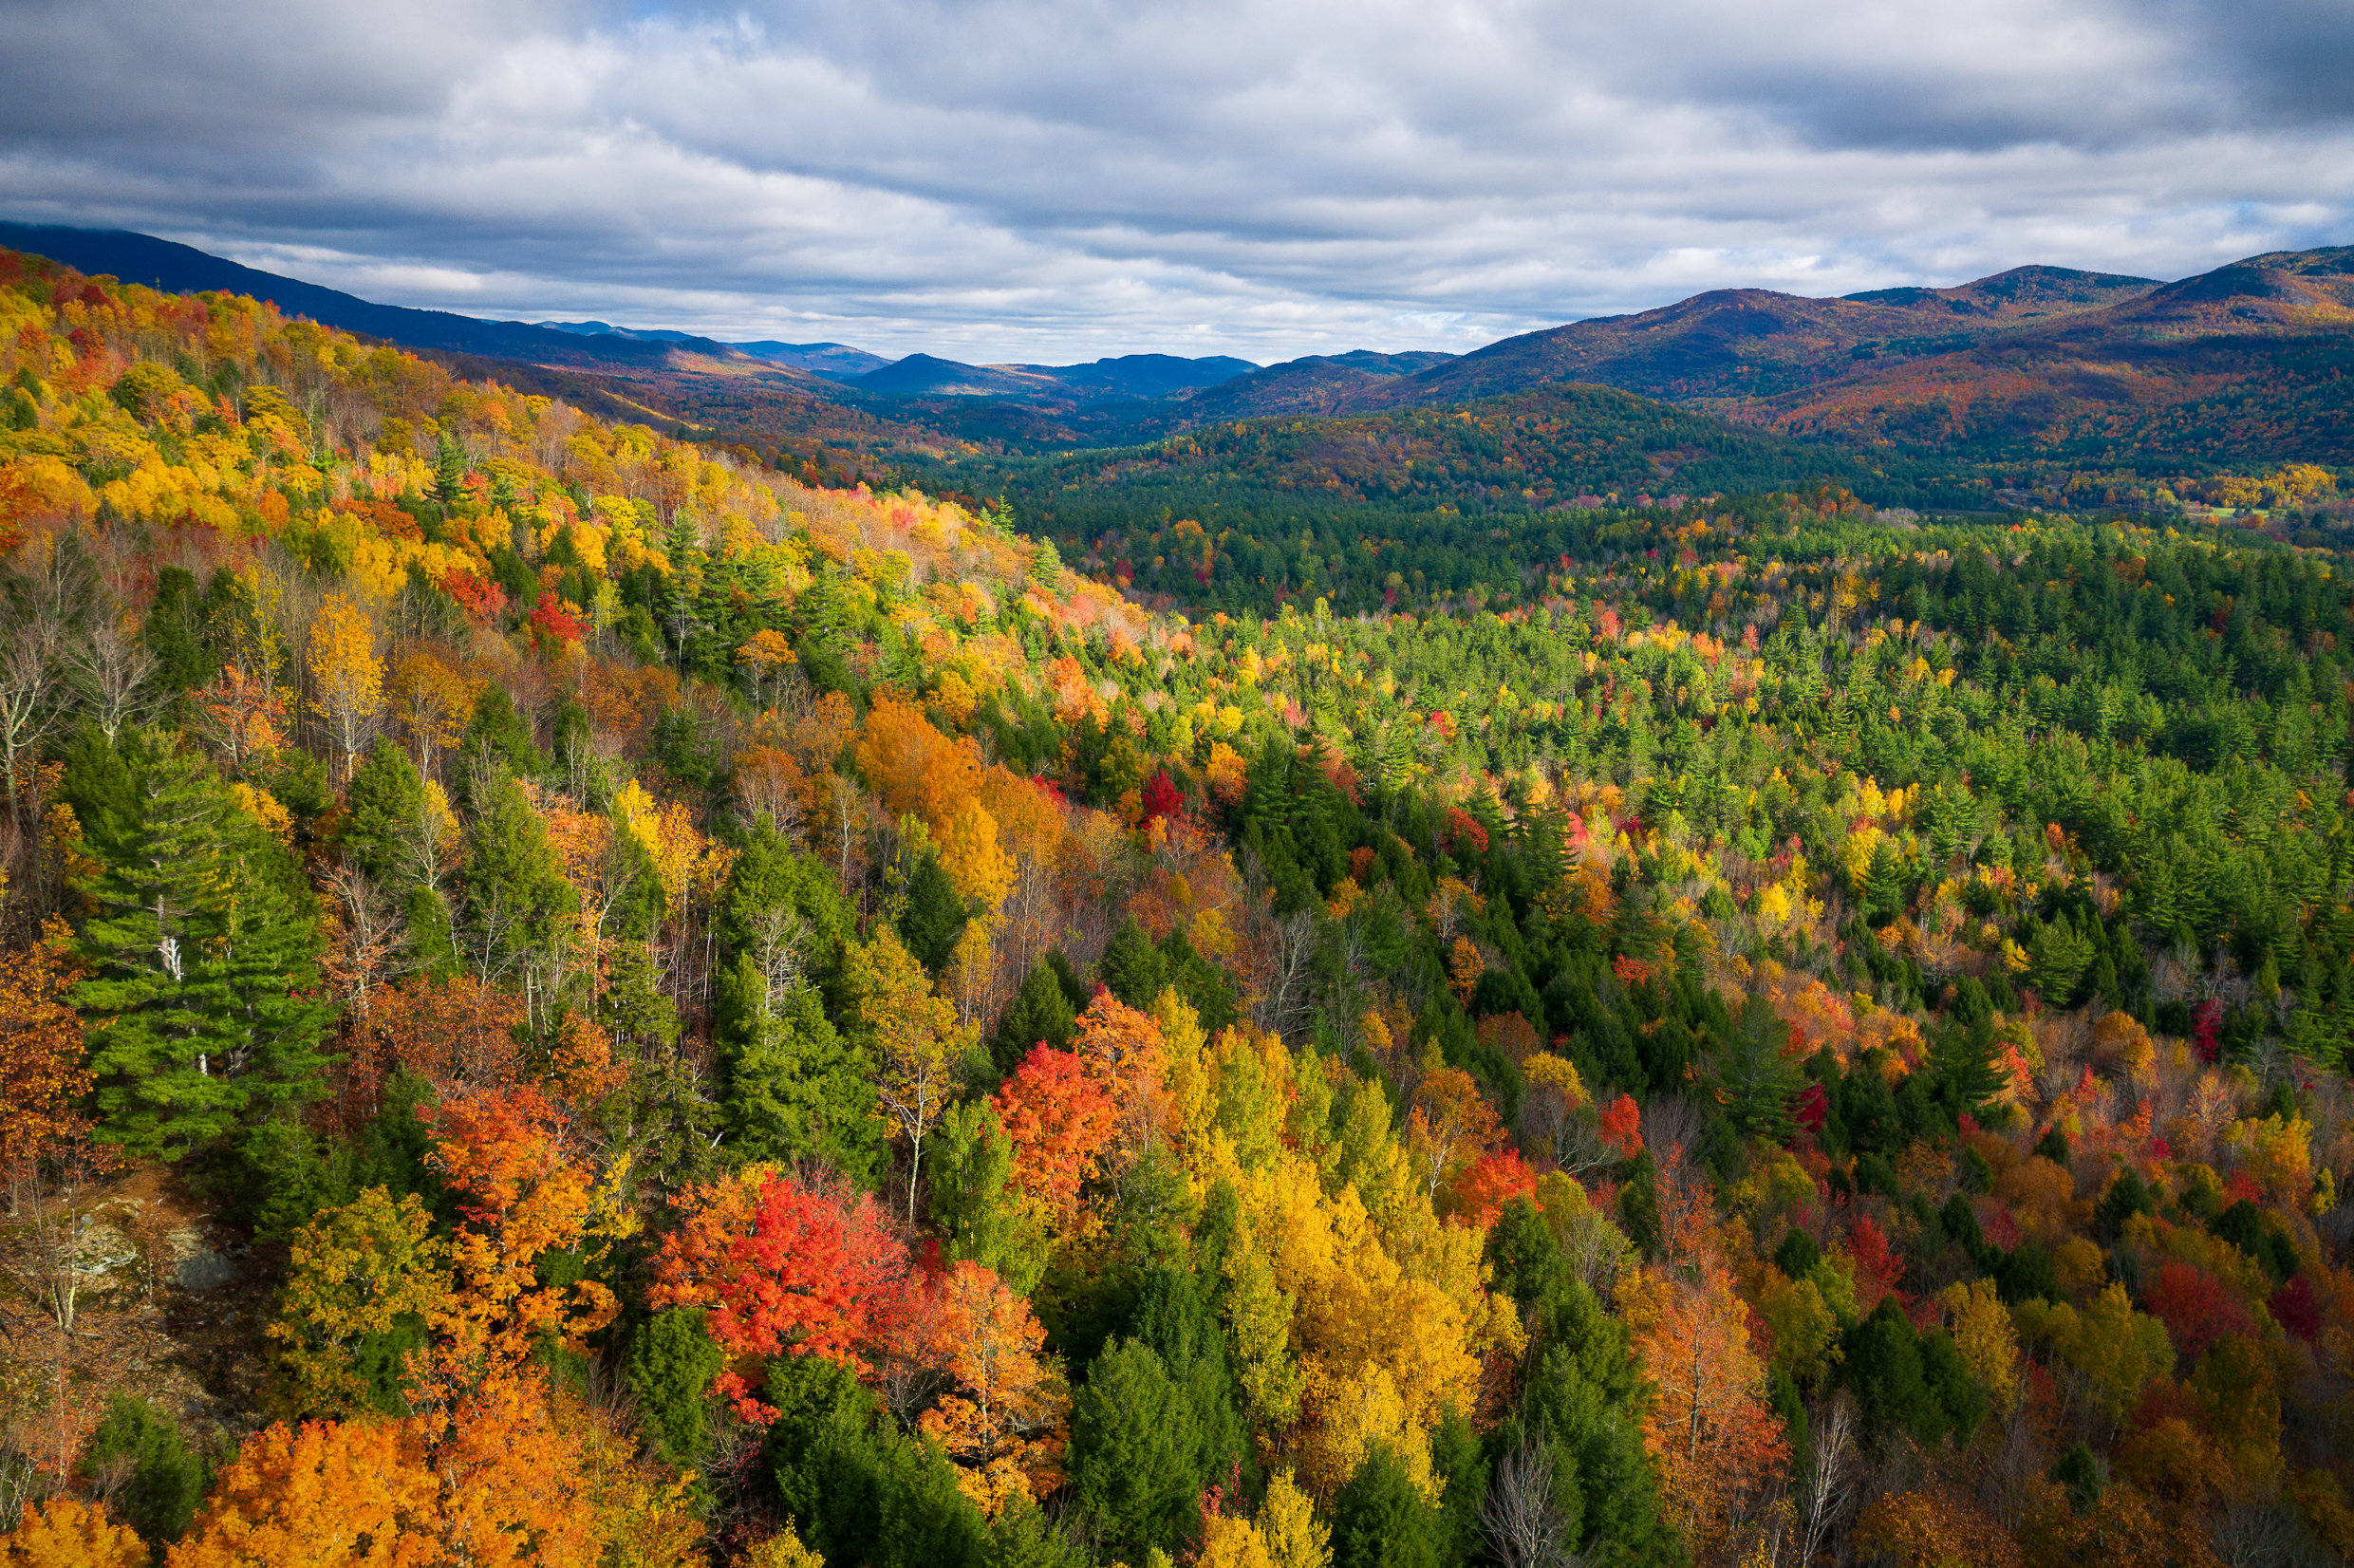 Learn more about forest bathing in the Adirondacks